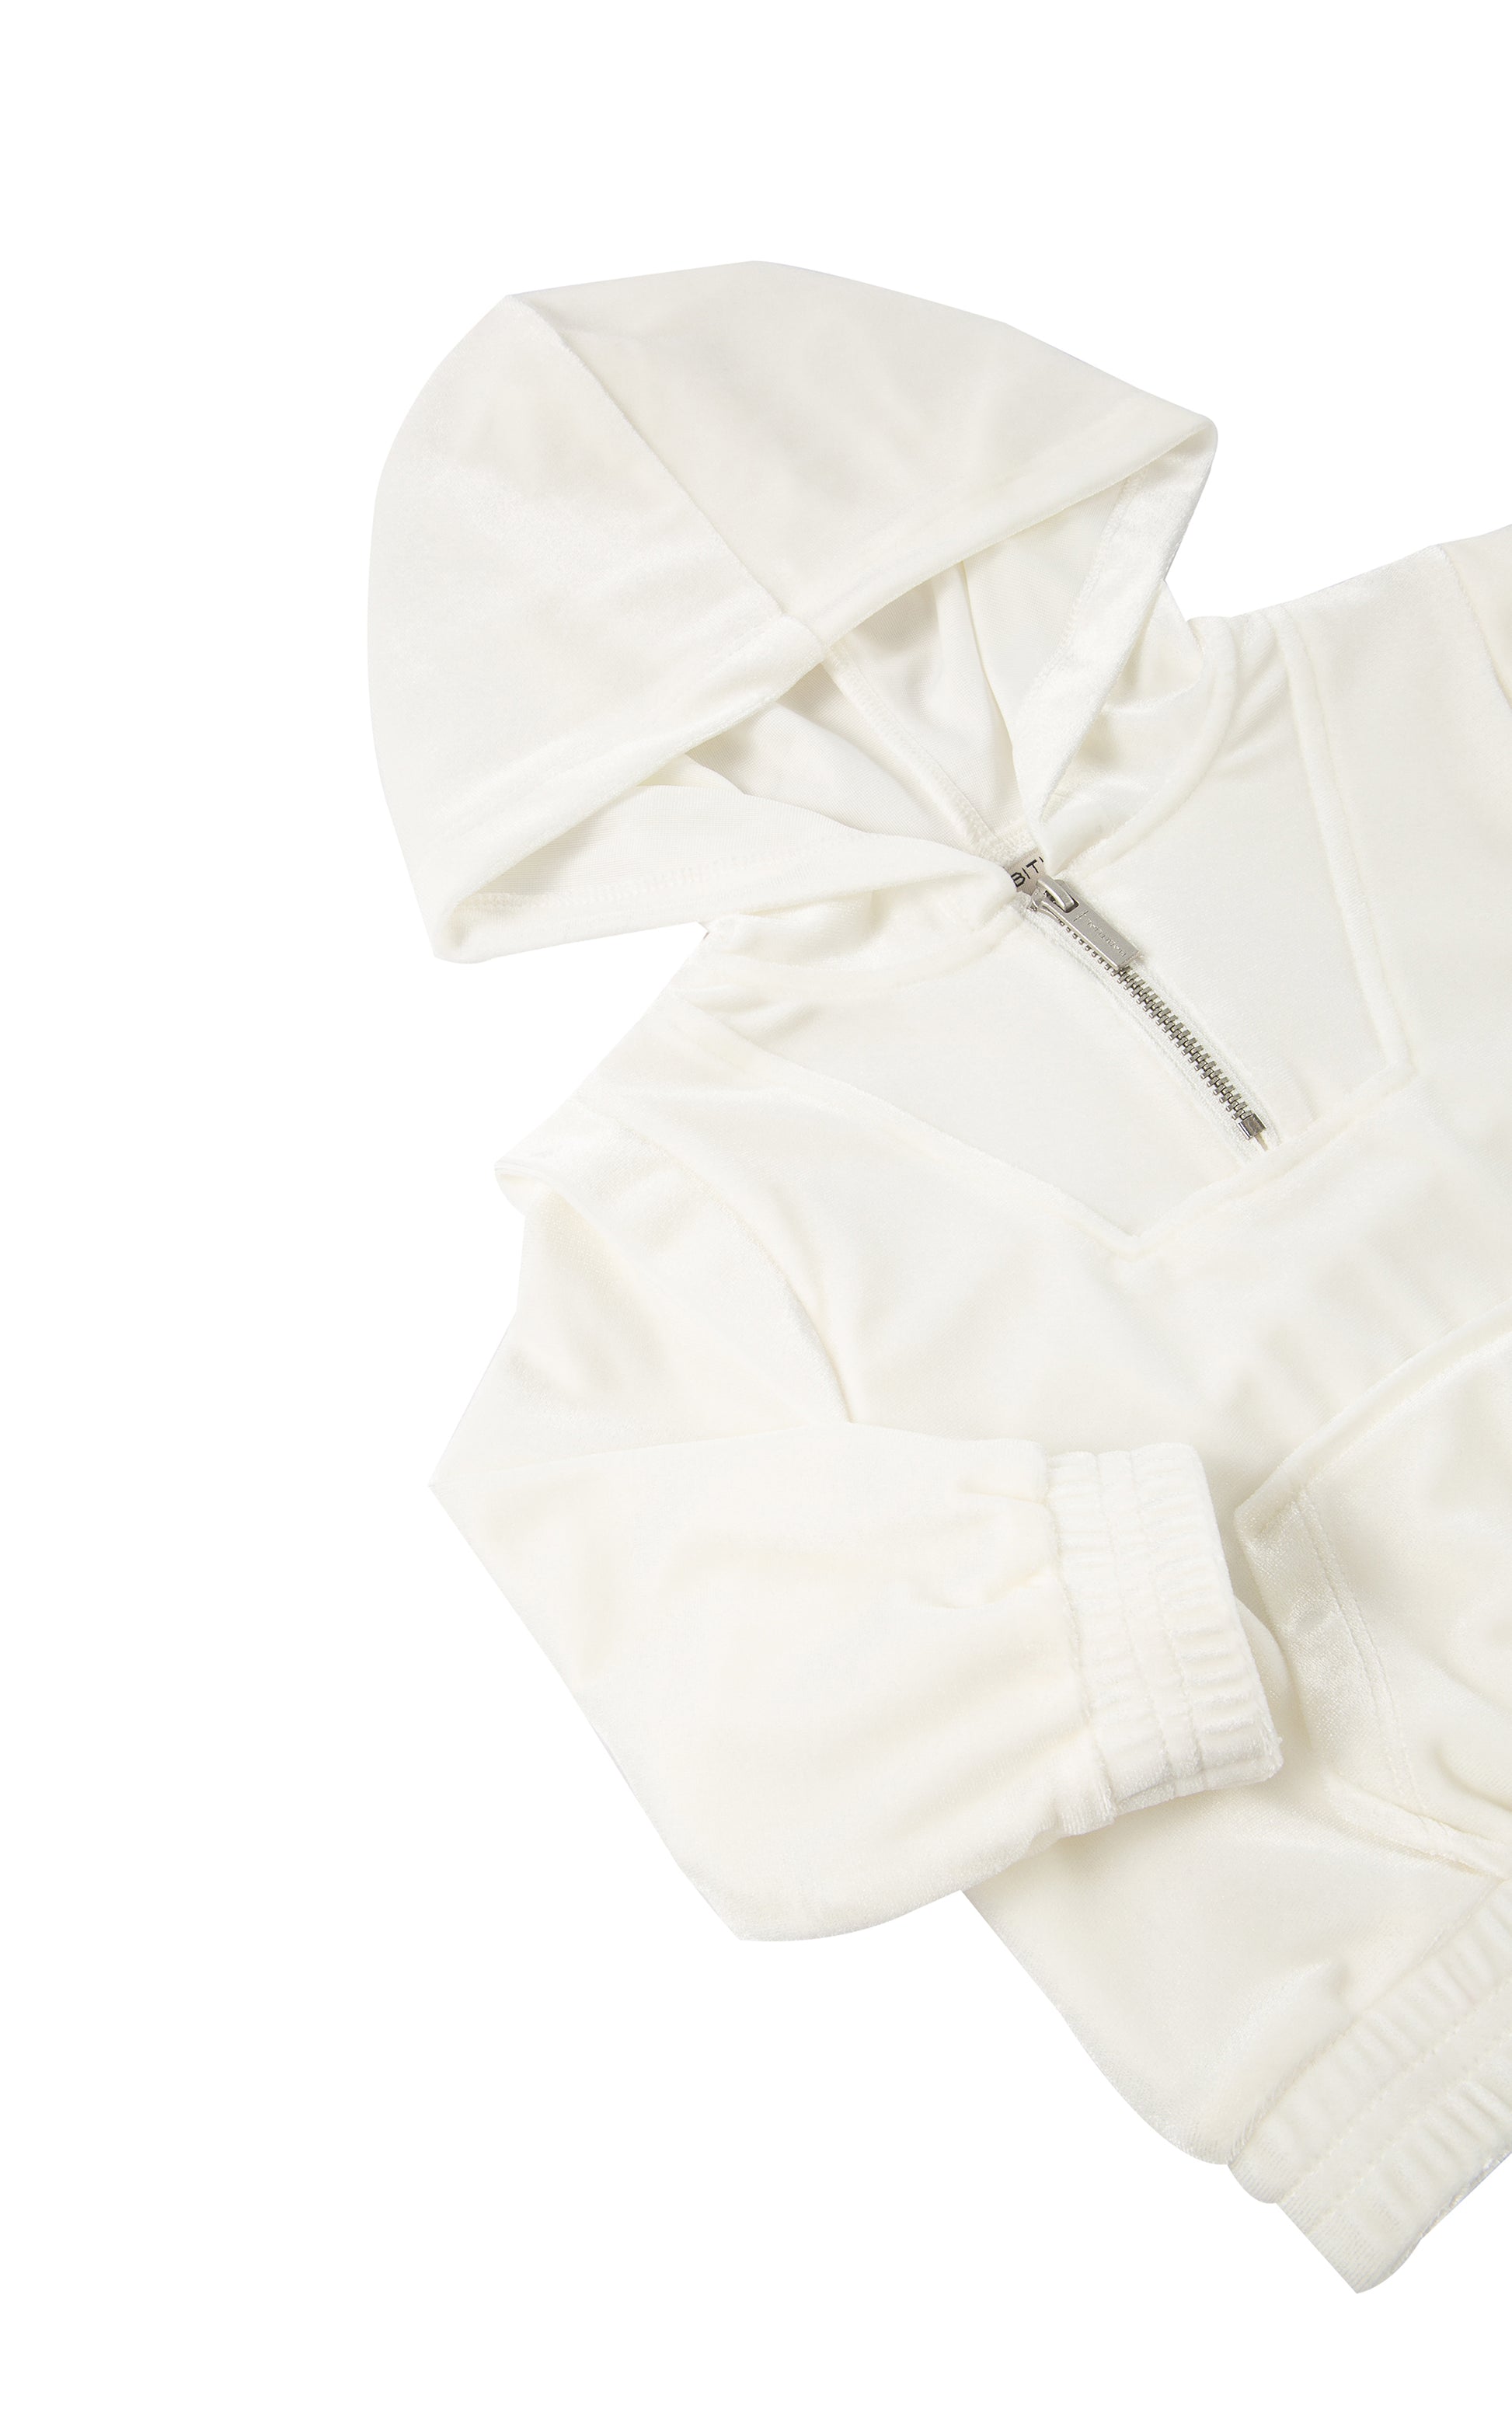 Detail view of an off-white velour tracksuit hoodie